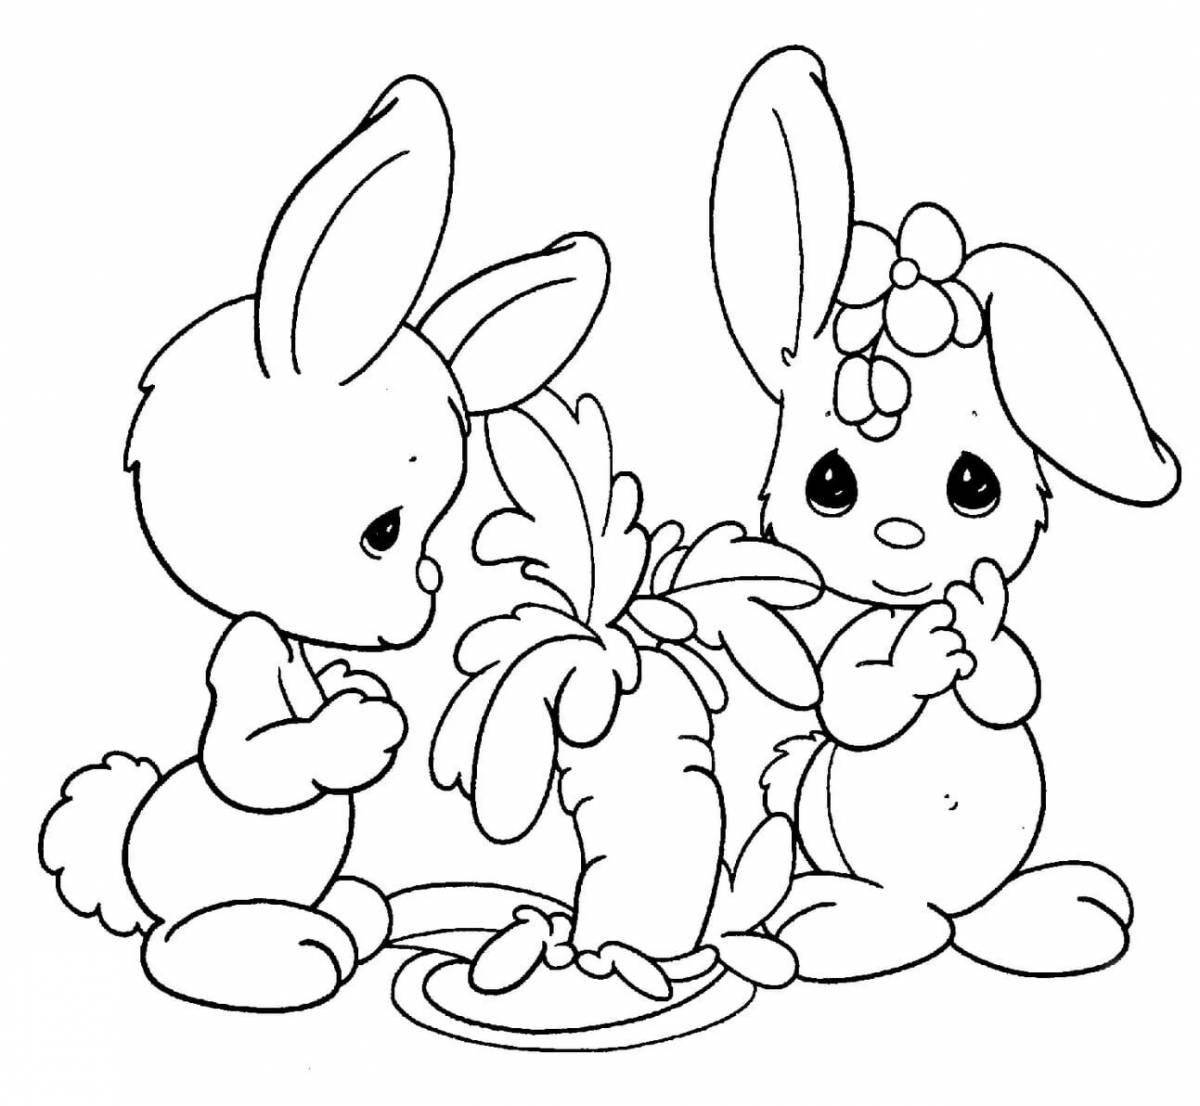 Coloring page playful cat and rabbit